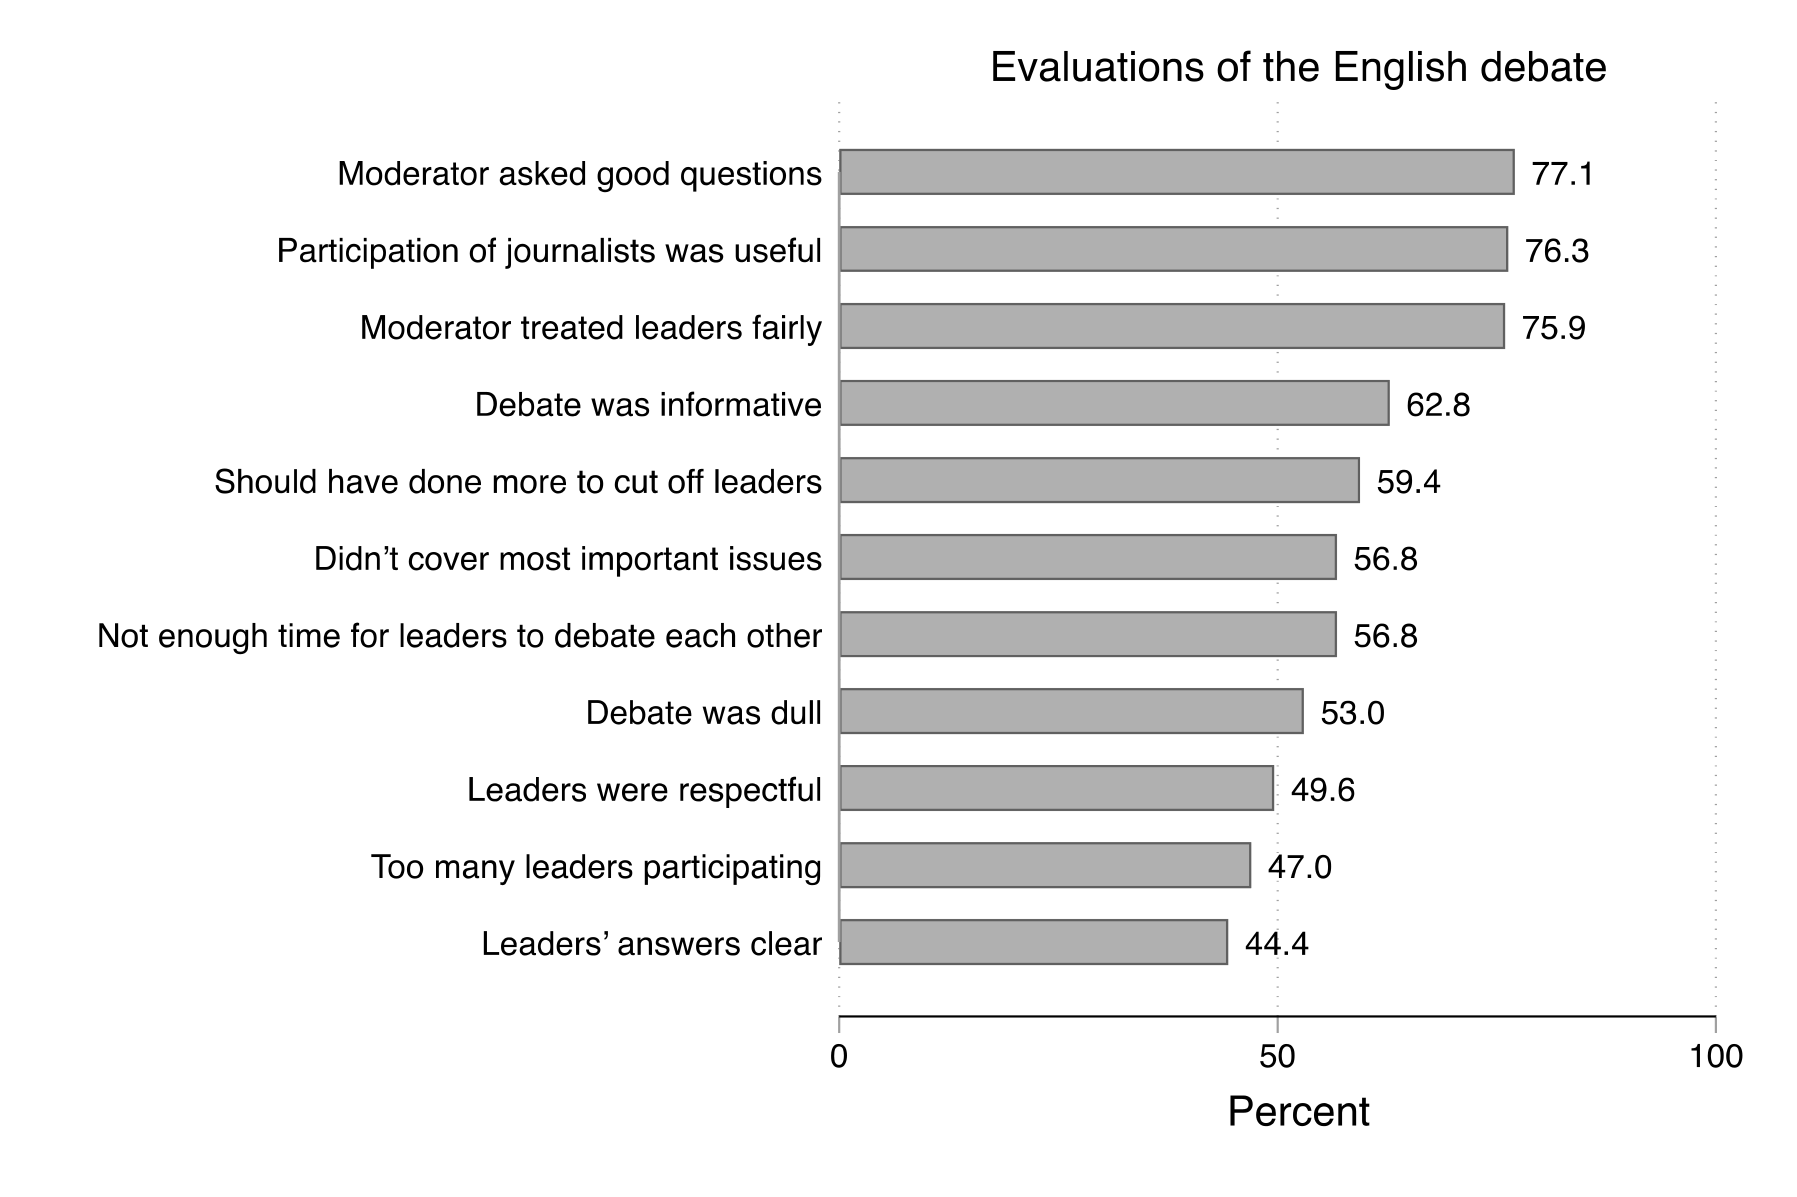 Figure 19. This figure indicates how viewers evaluated the English-language debate. A large majority of viewers thought that the moderator asked good questions and that the participation of the other journalists was useful. Only 44% of viewers thought that the leaders' answers were clear.